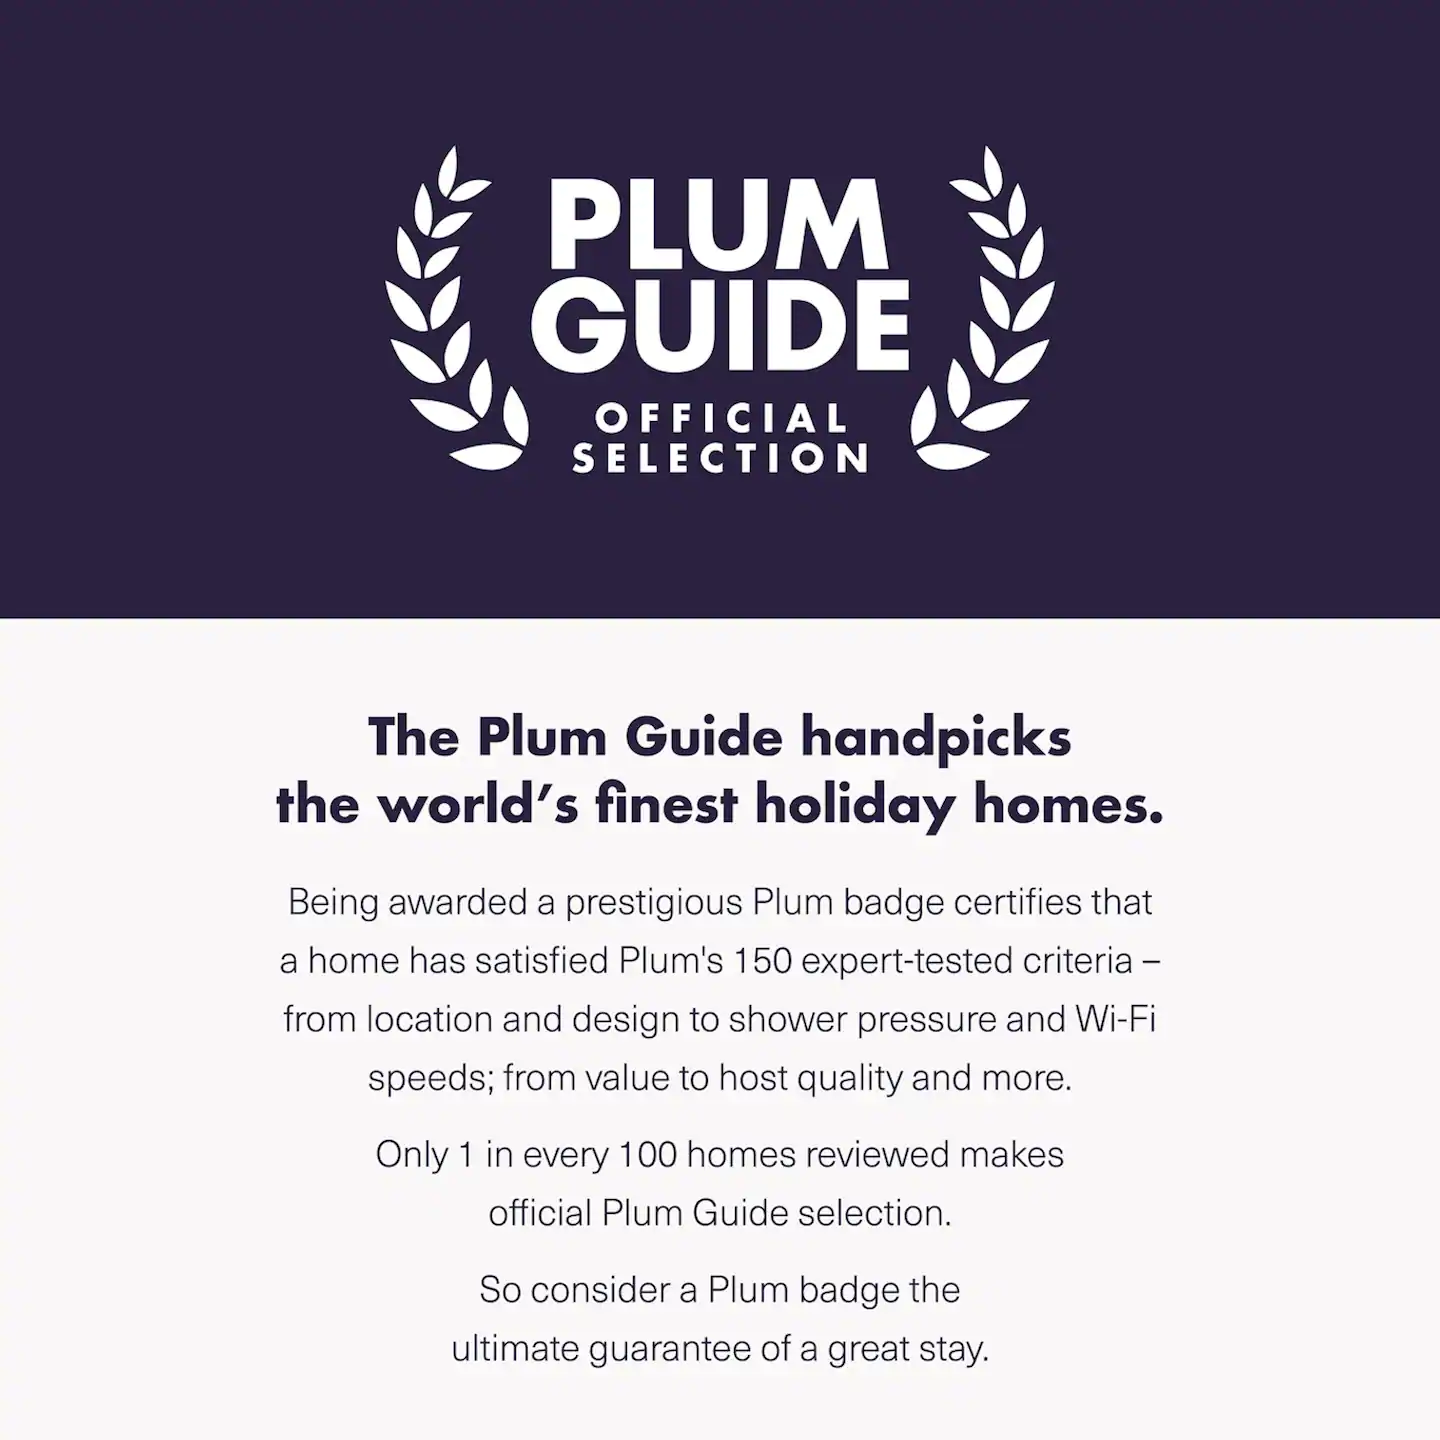 The apartment is part of "The Plum Guide" Official Selection